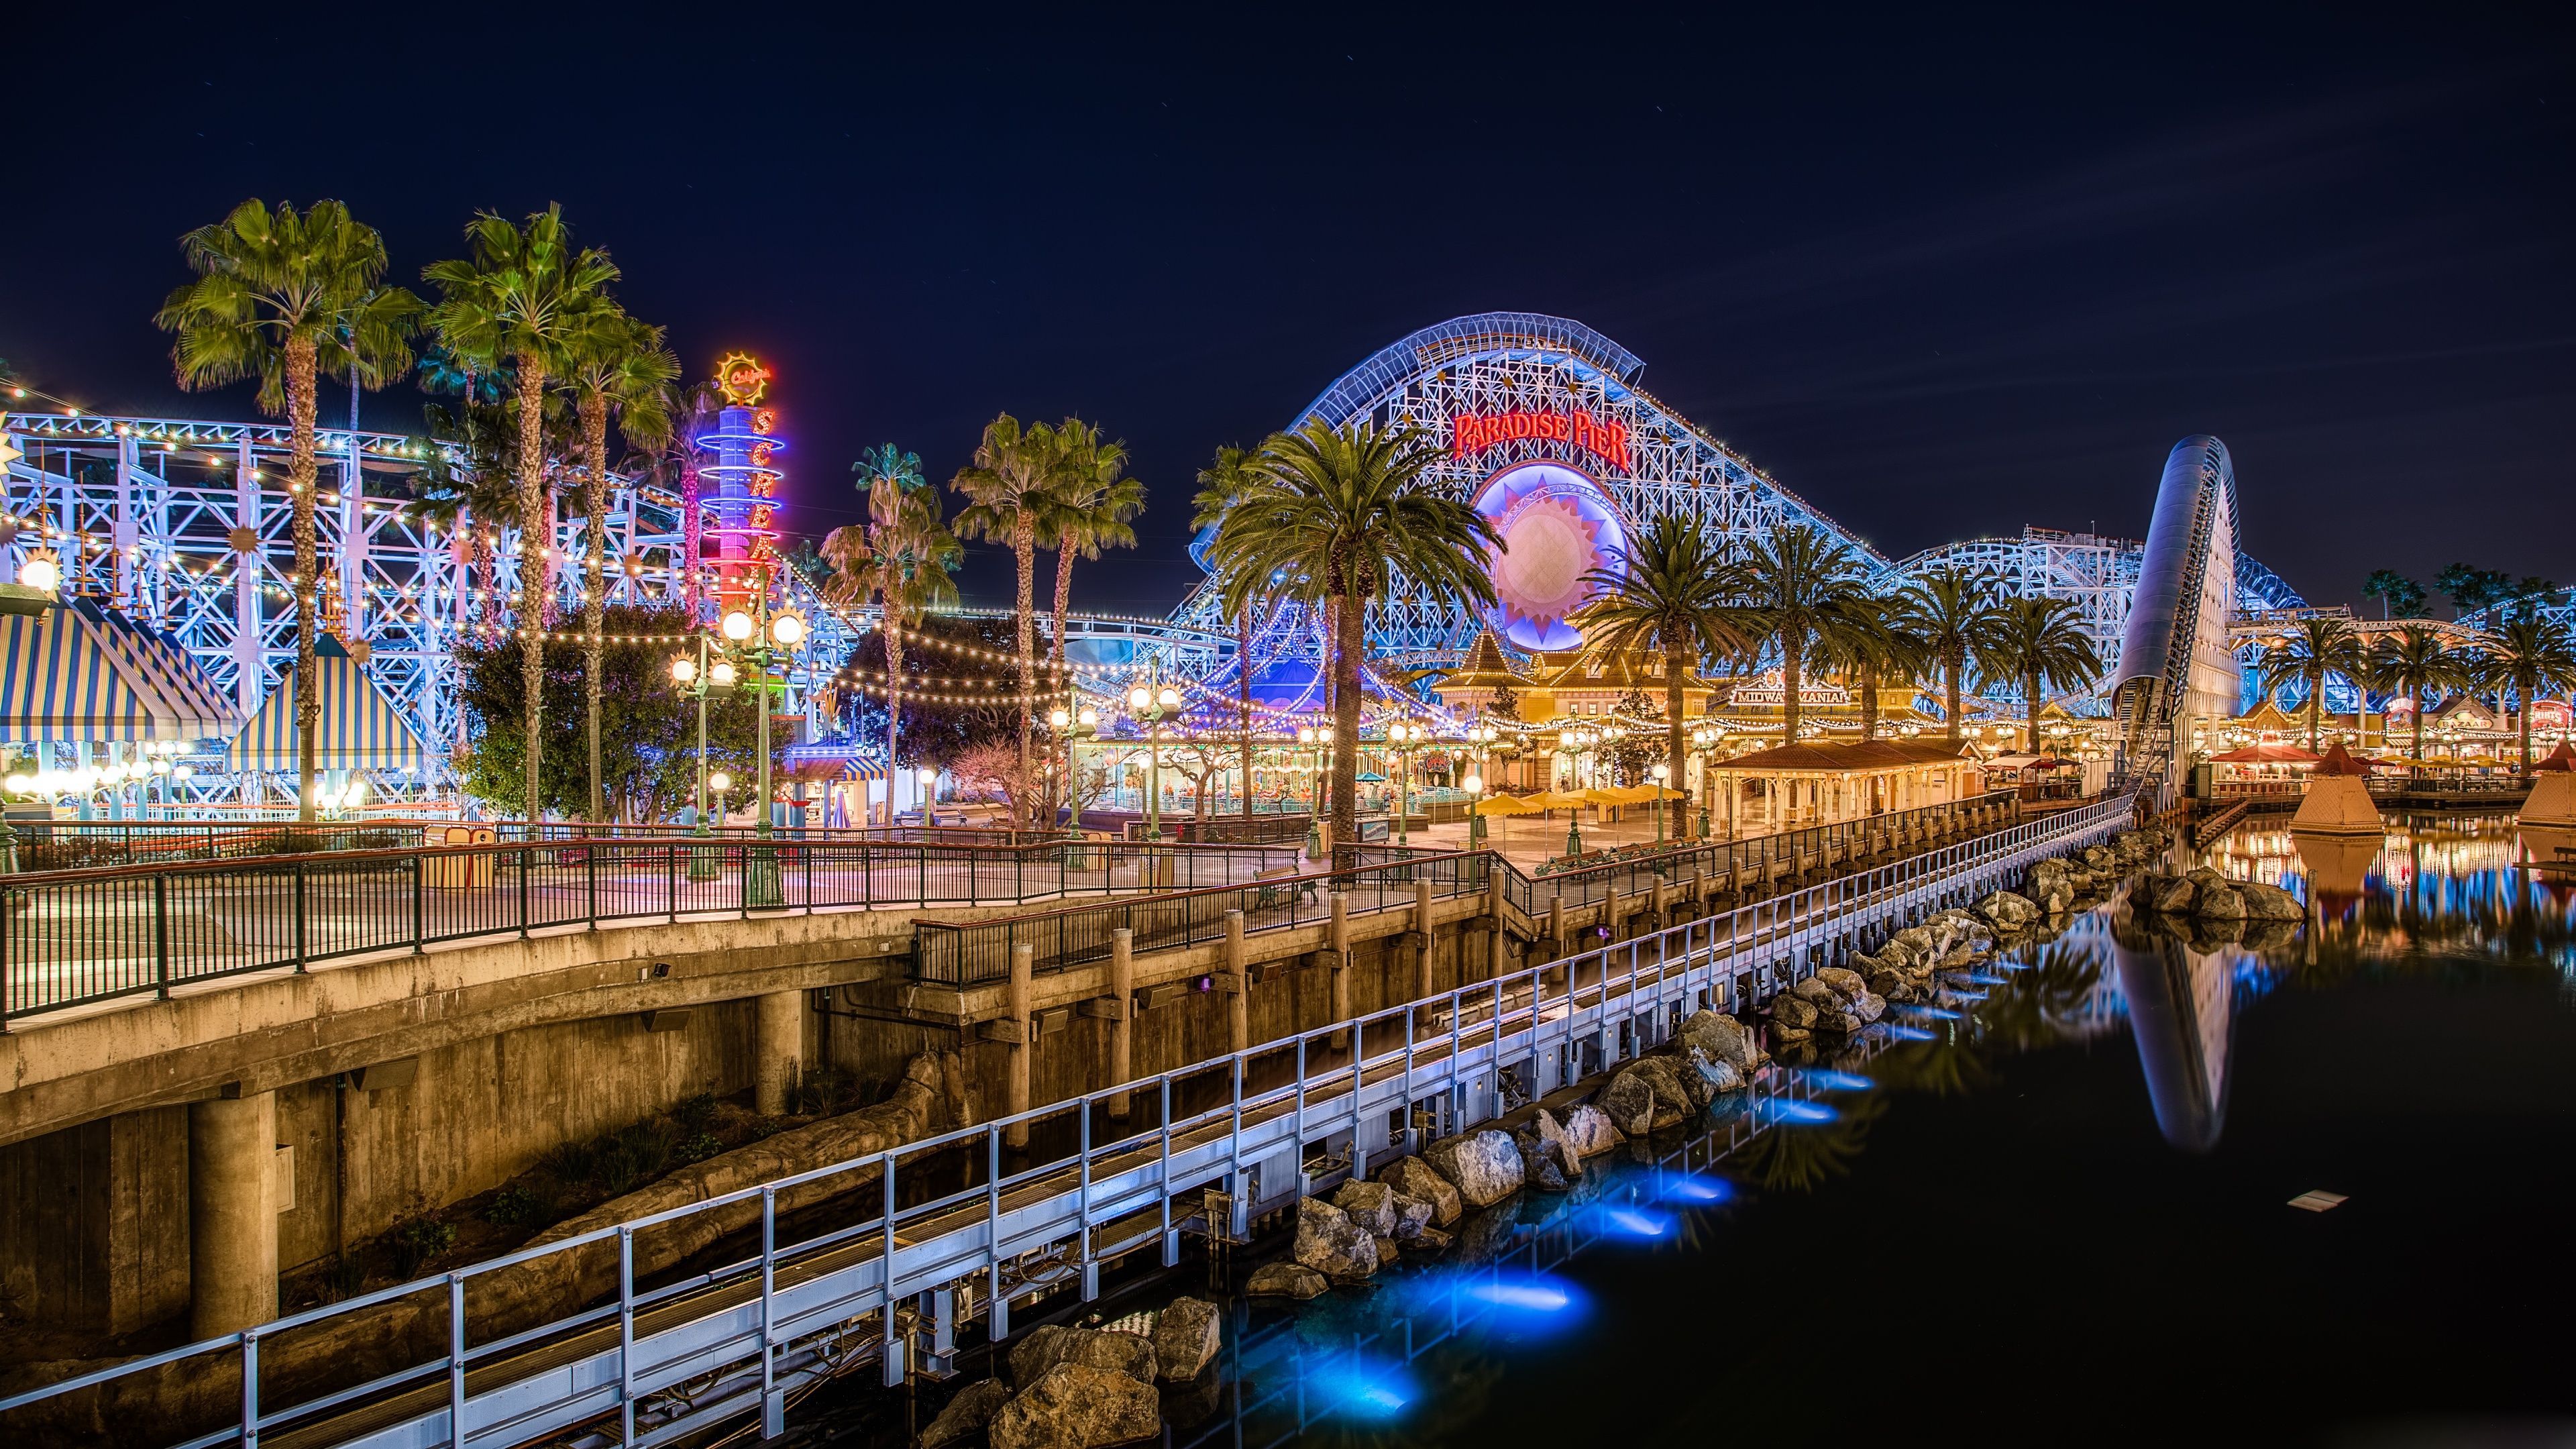 A nighttime view of the Paradise Pier and the roller coaster. - California